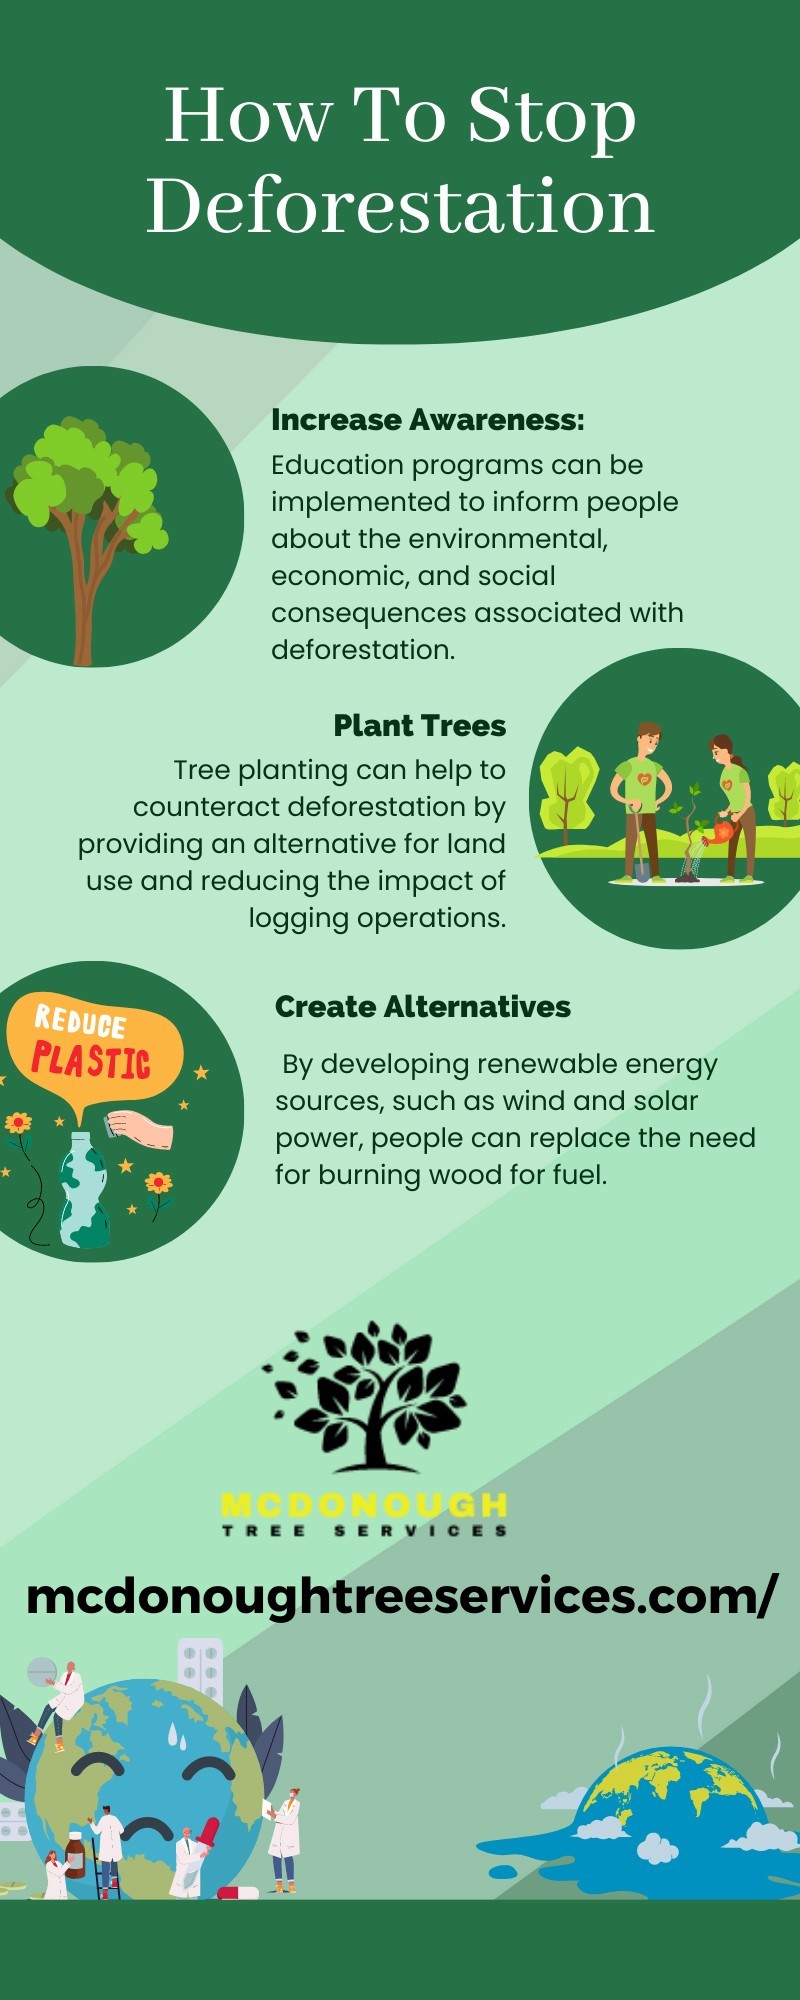 How To Stop Deforestation [Infographic]